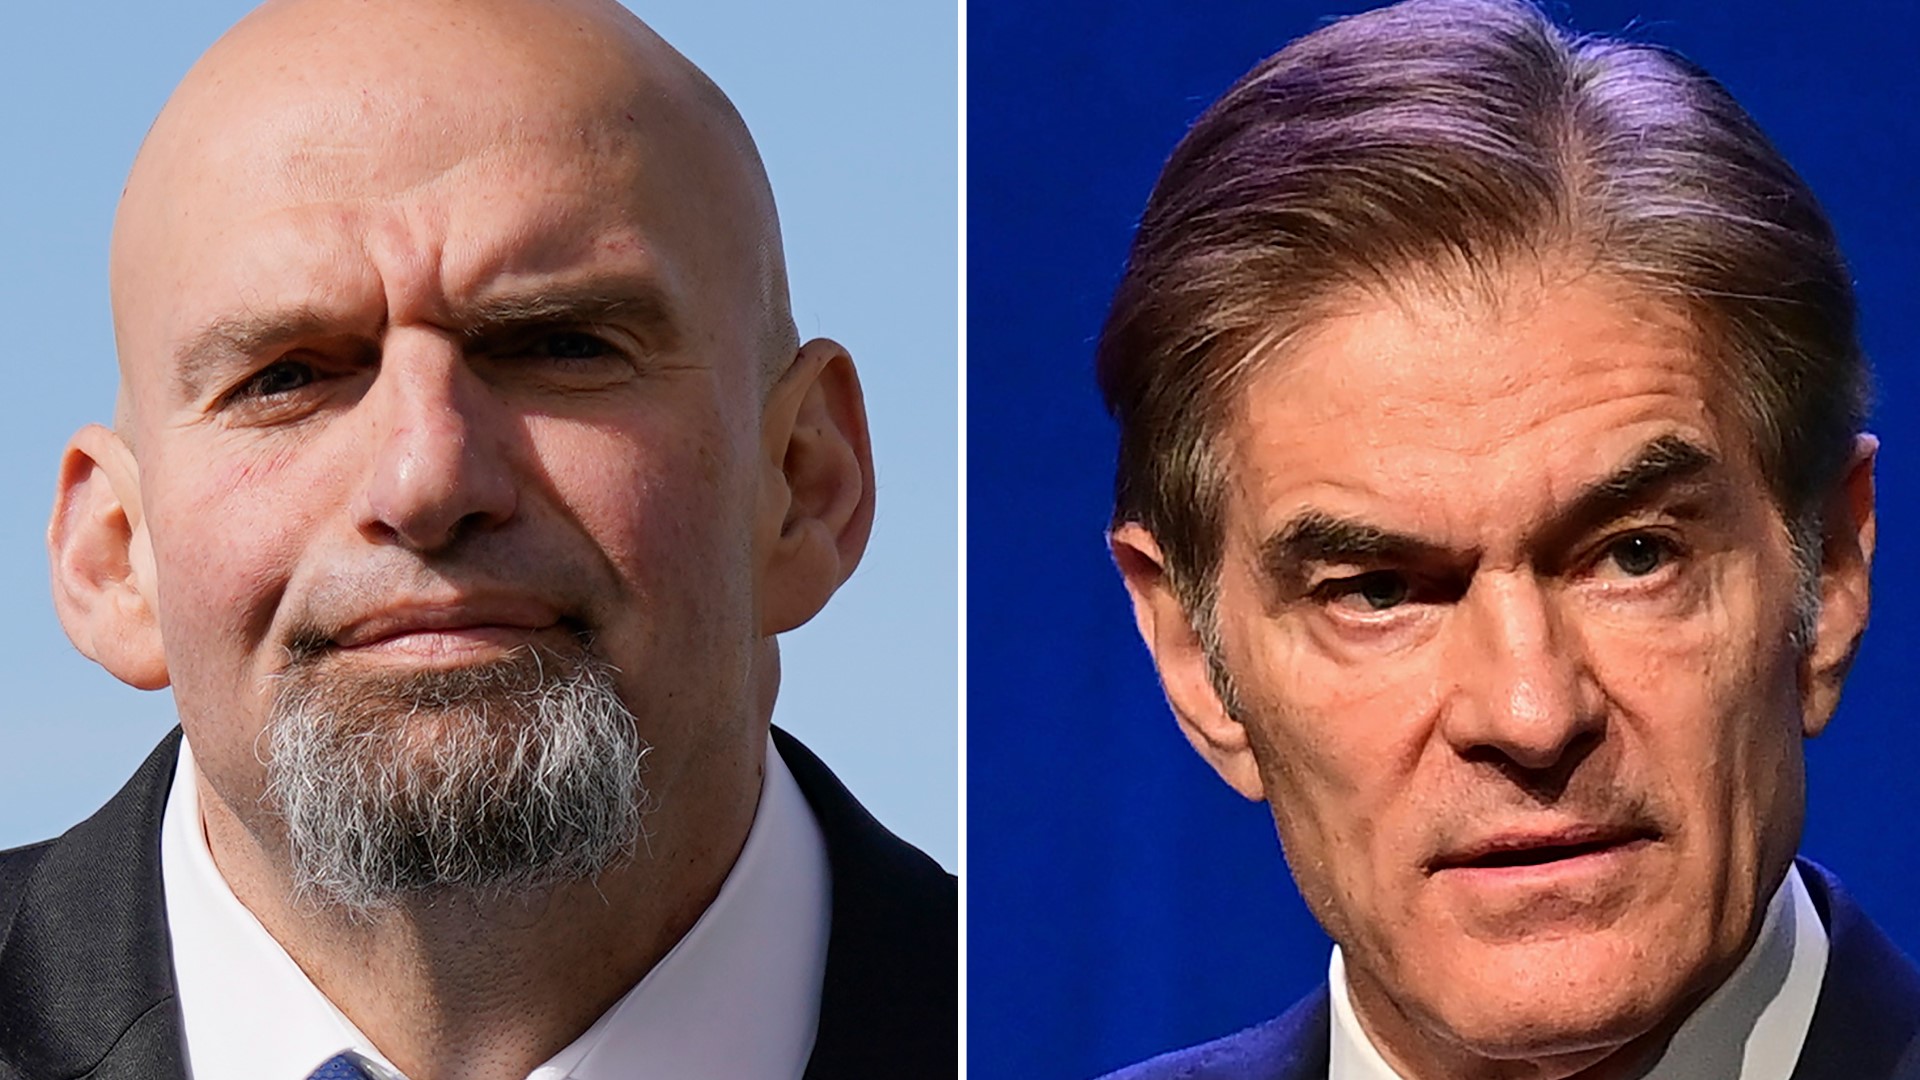 The debate generally played out as expected: Fetterman stumbled over some words and both candidates spent much of their time attacking each other.